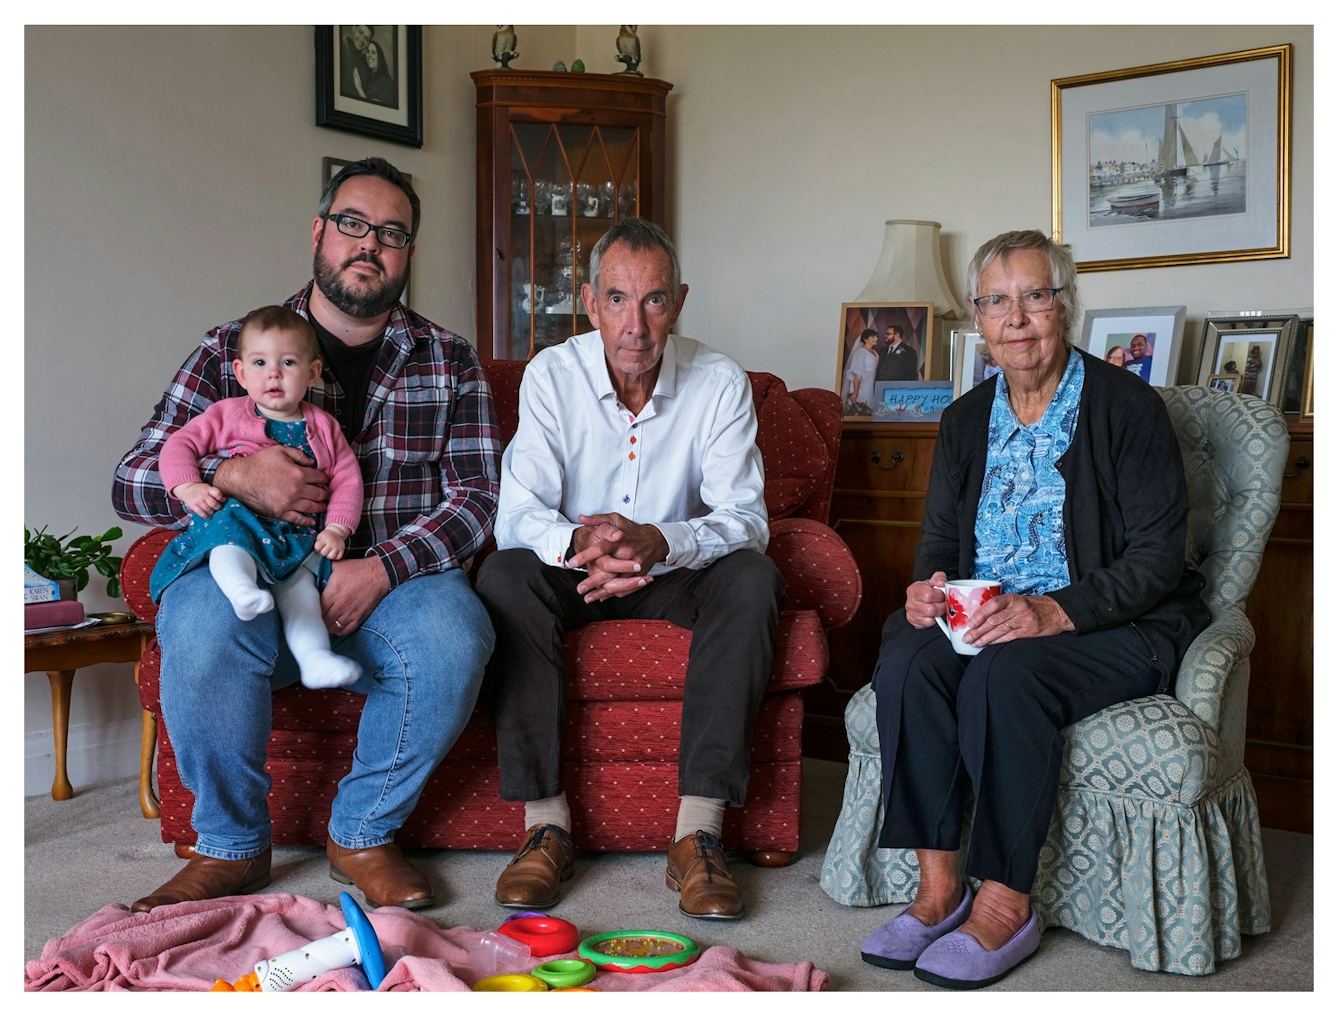 Family group photograph showing four generations of the same family. The great-grandmother sits on the right holding a hot drink in a mug, by her side sits the grandfather leaning forwards, fingers latticed. Next to him is the grandson who holds the great-granddaughter who is a toddler on his knee. They are all seated on a sofa and an armchair in a living room, surrounded by framed photographs, cupboards and a blanket on the floor covered in toddler toys. They all look straight into the camera.